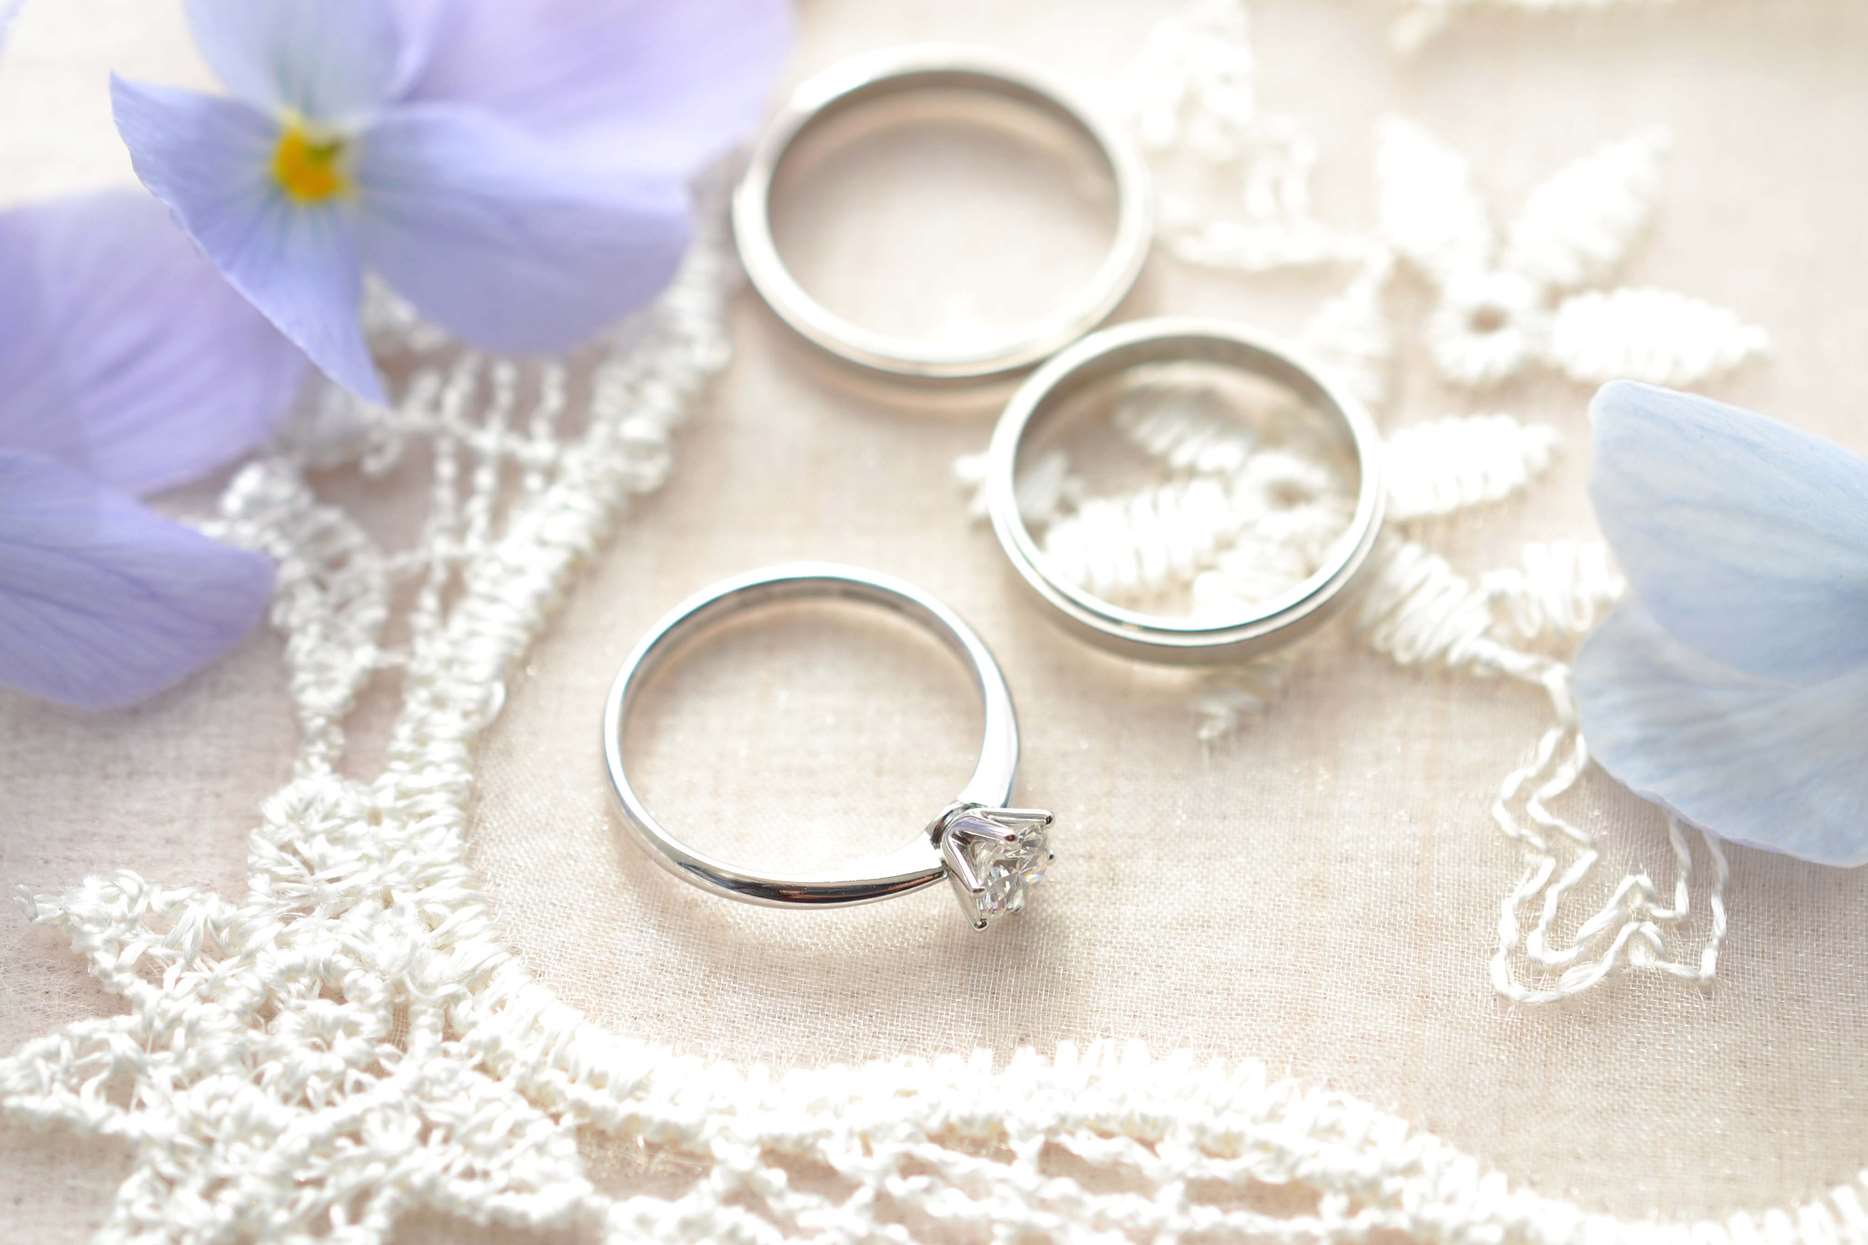 Choosing the best ring for the job